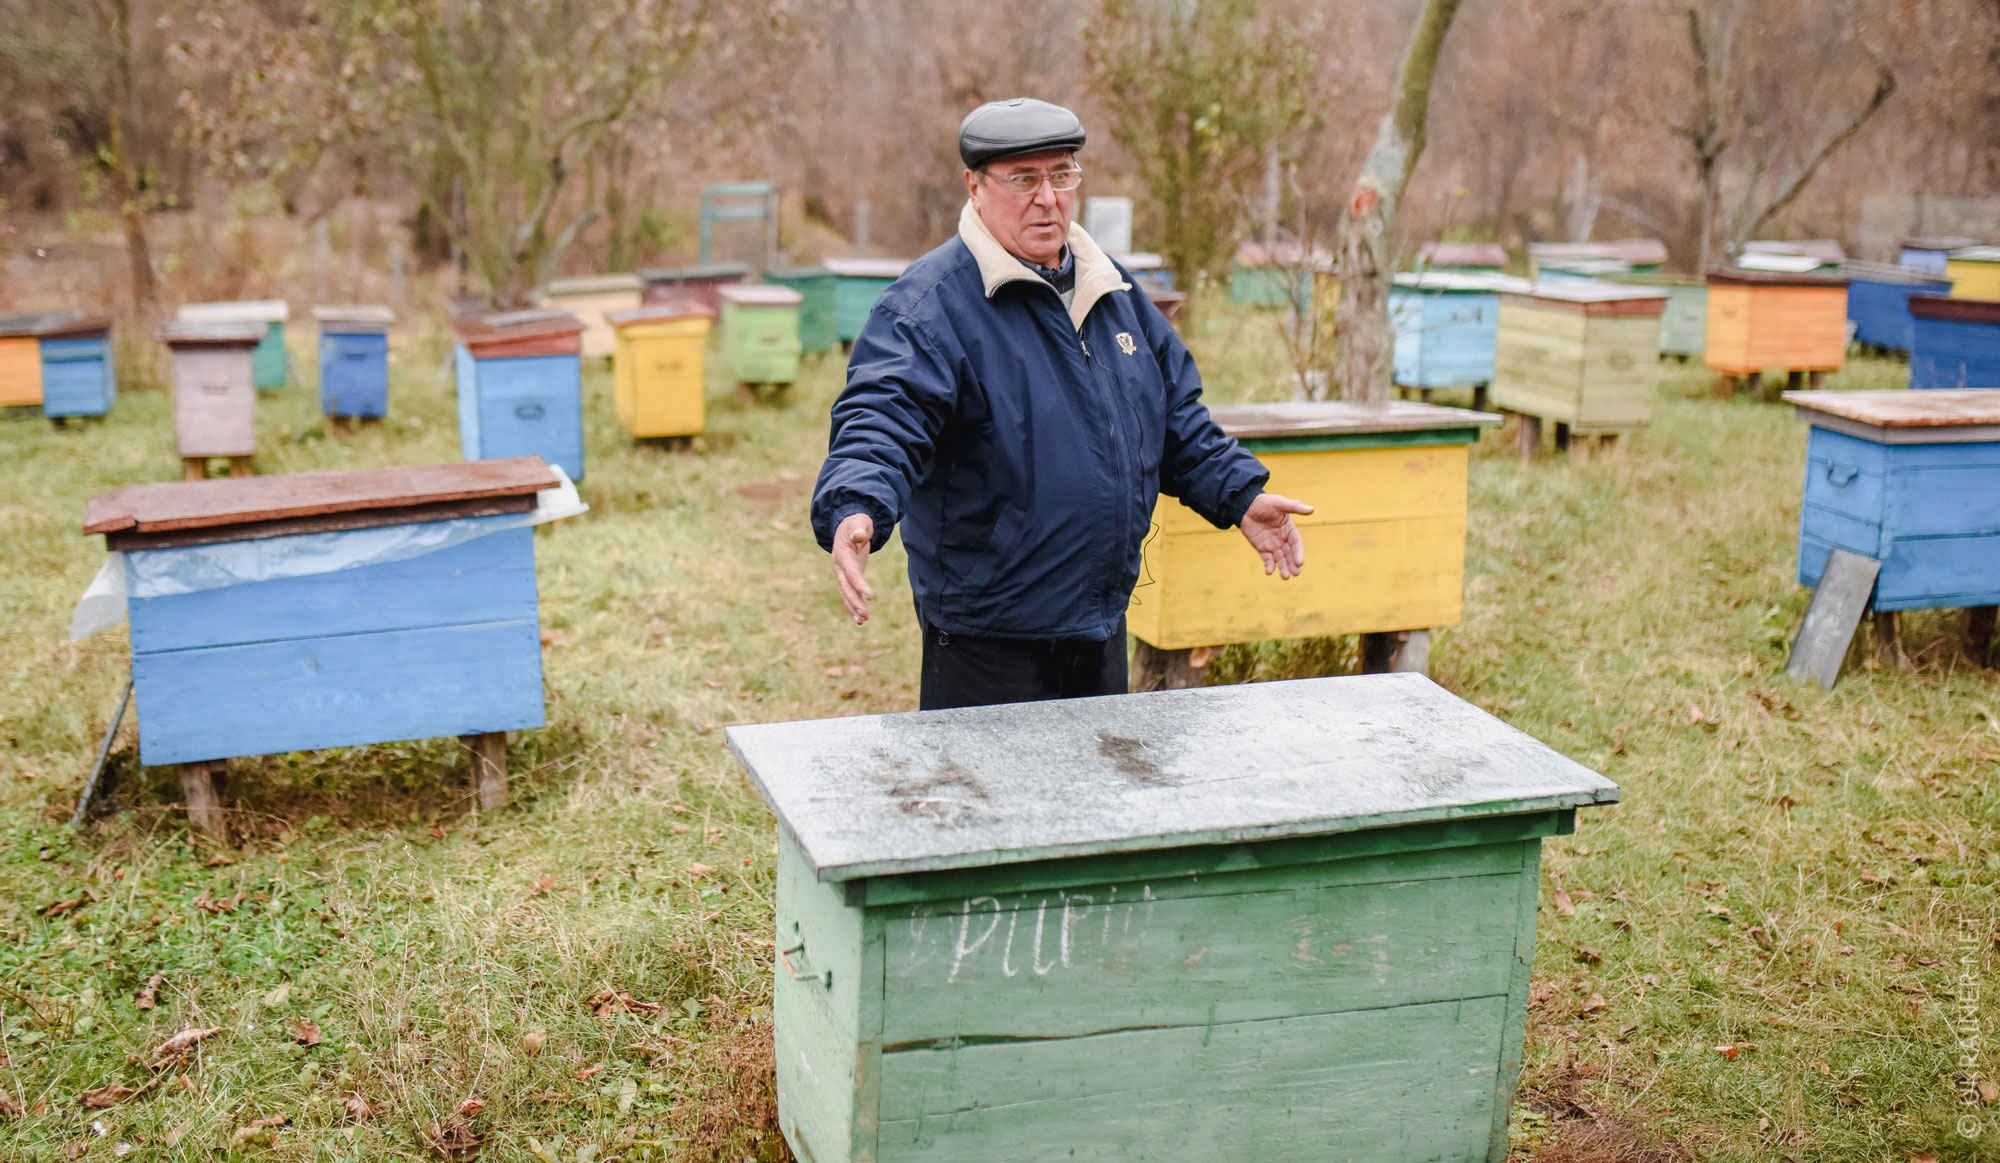 Hives instead of houses